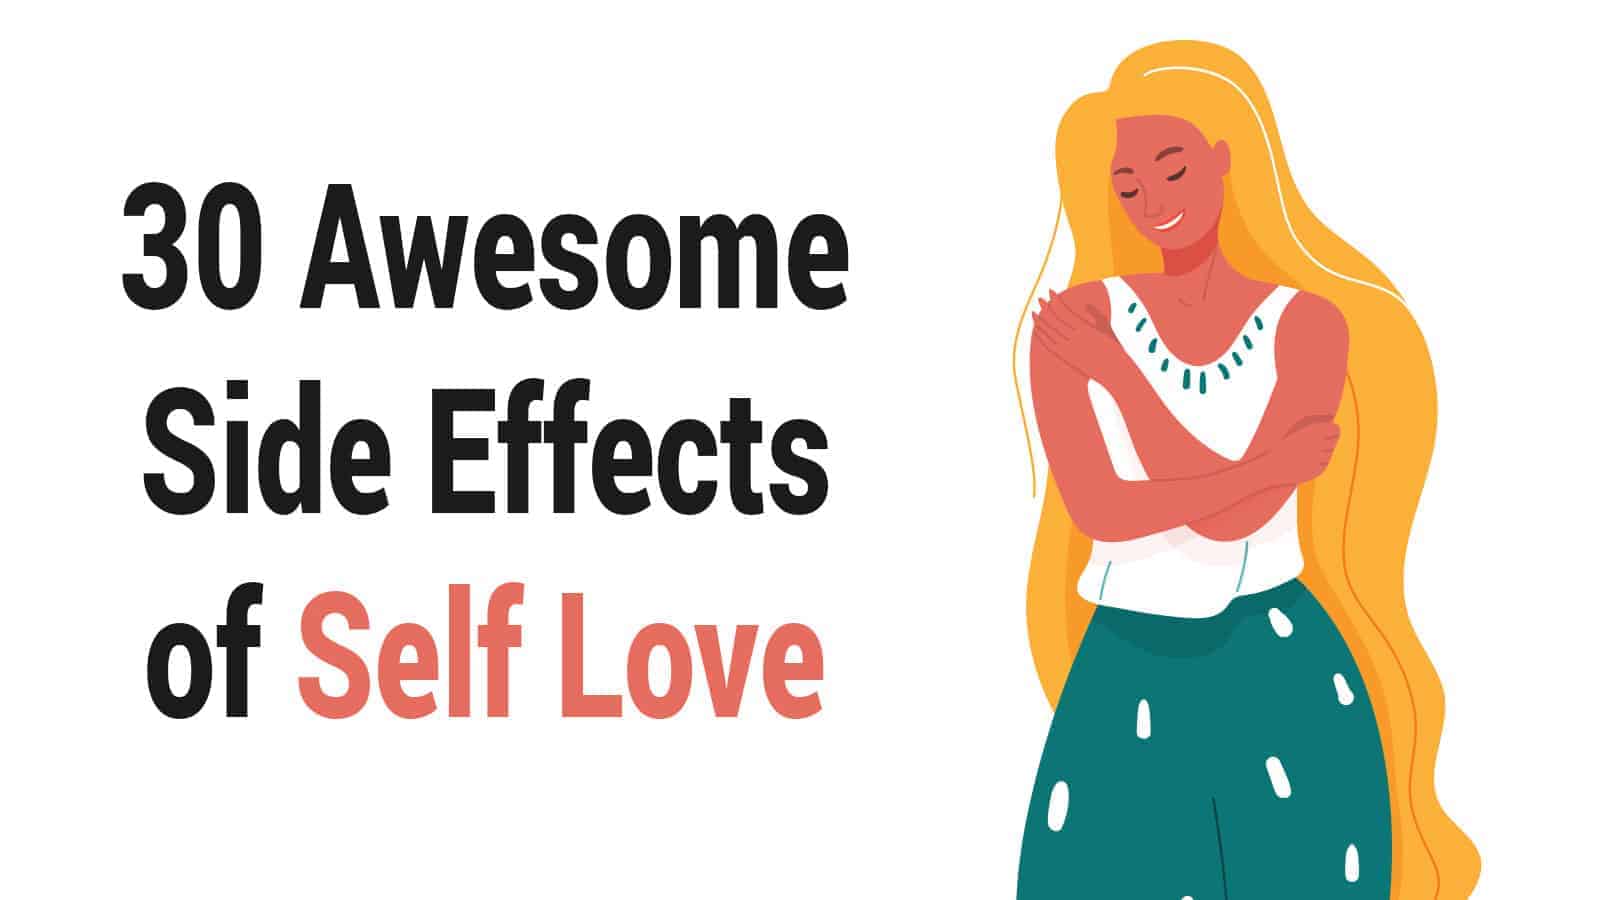 30 Awesome Side Effects of Self Love